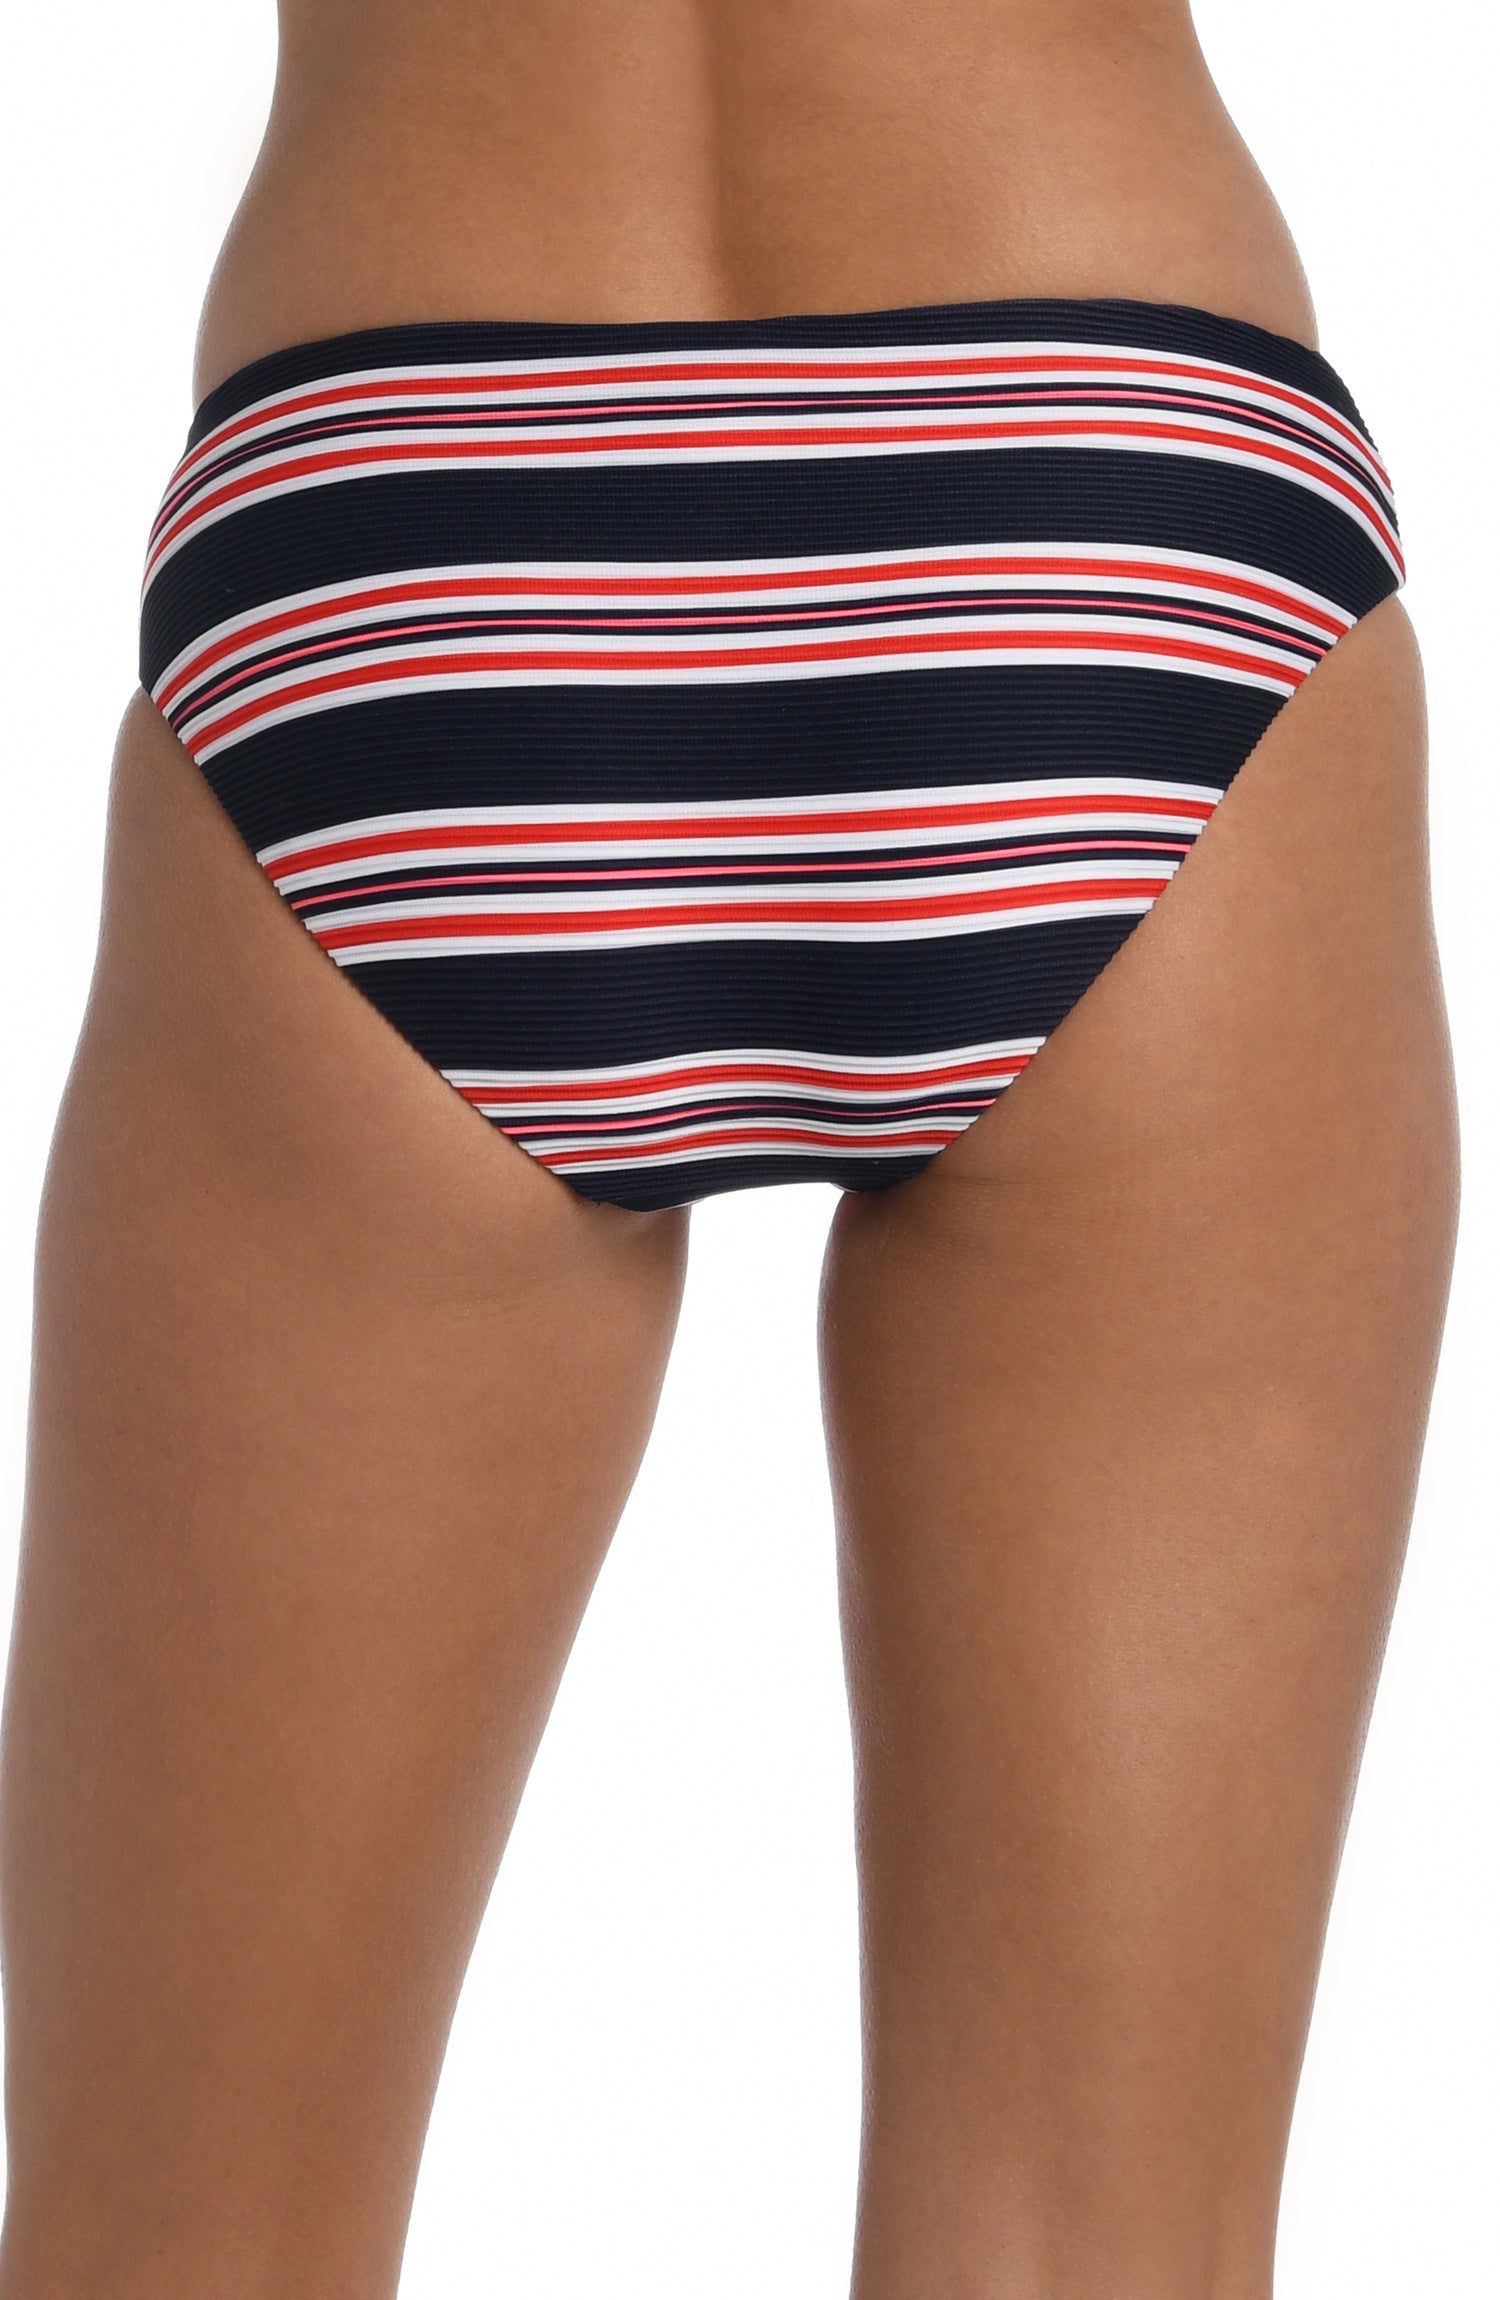 Model is wearing a red, white, and blue striped patterned hipster bottom from our Sailor Stripe collection!